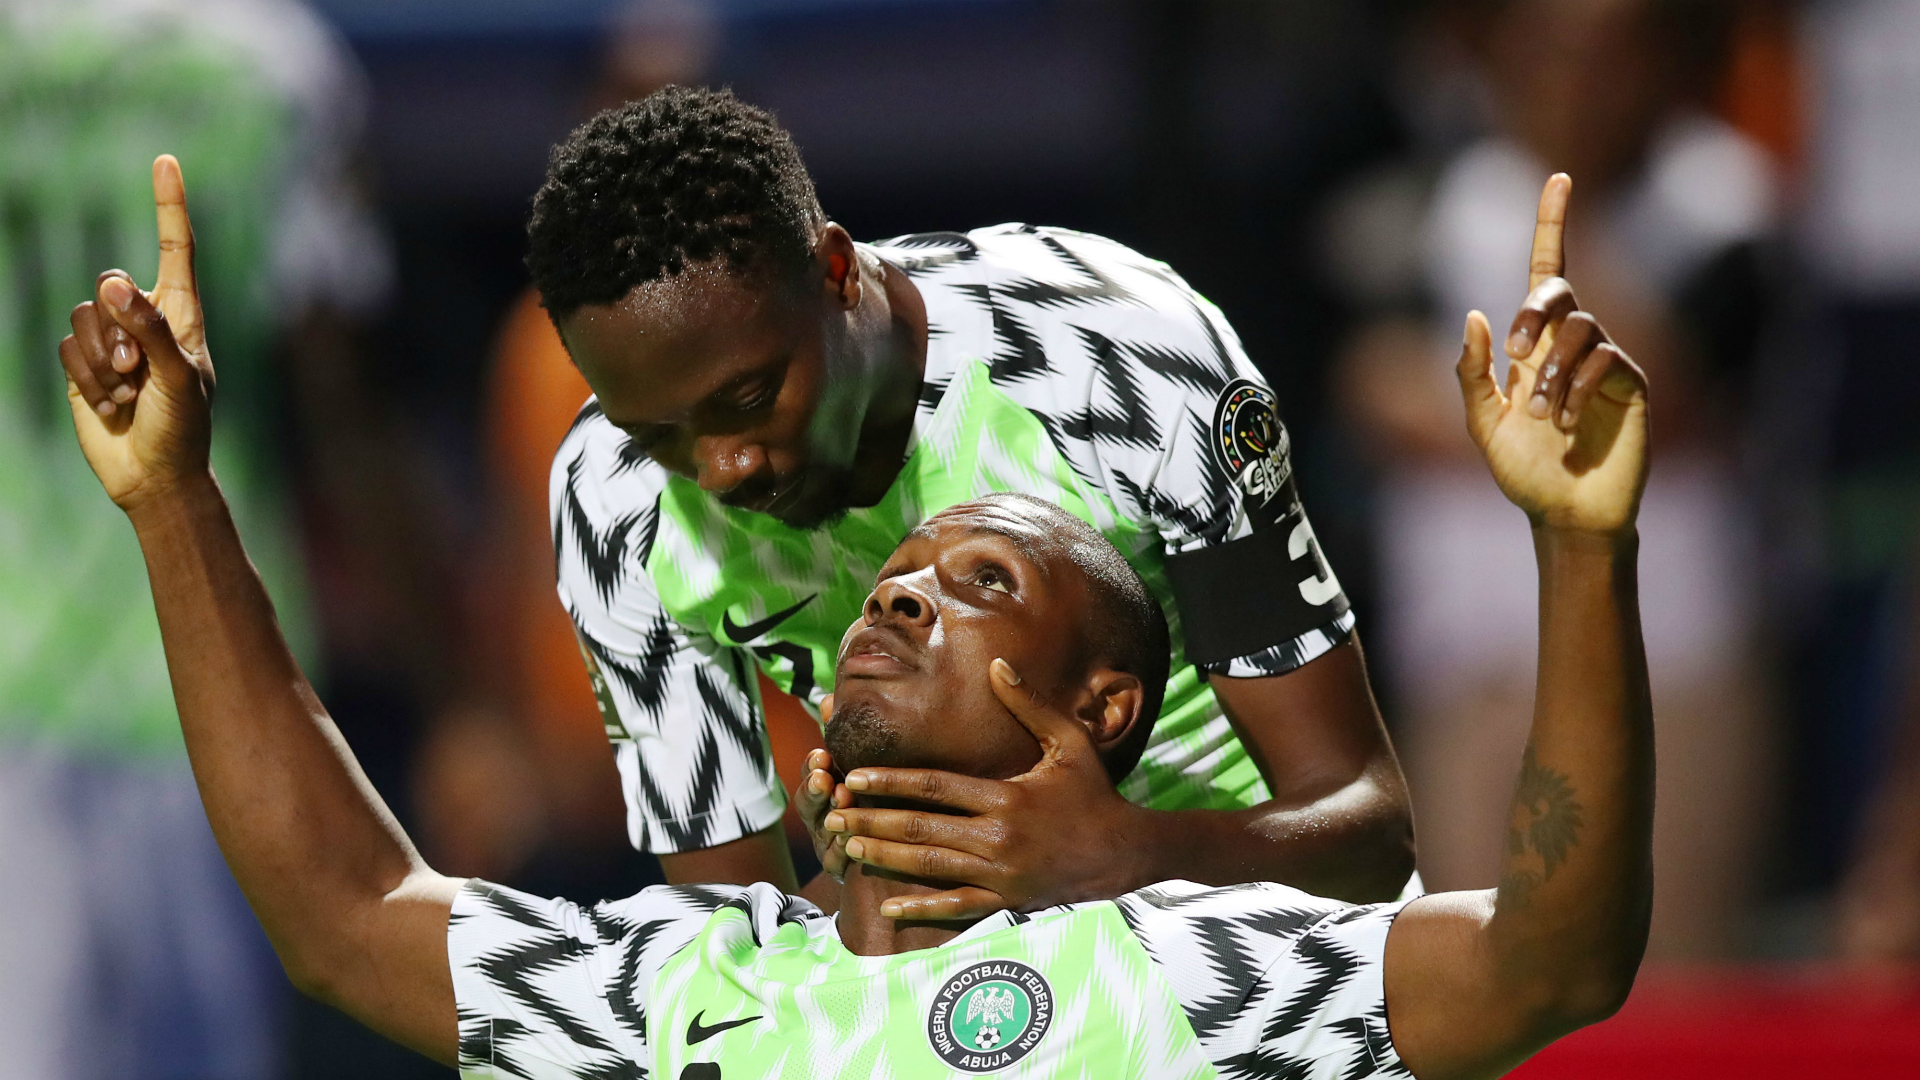 News Flash: Super Eagles come from behind to beat Cameroon at 2019 AFCON